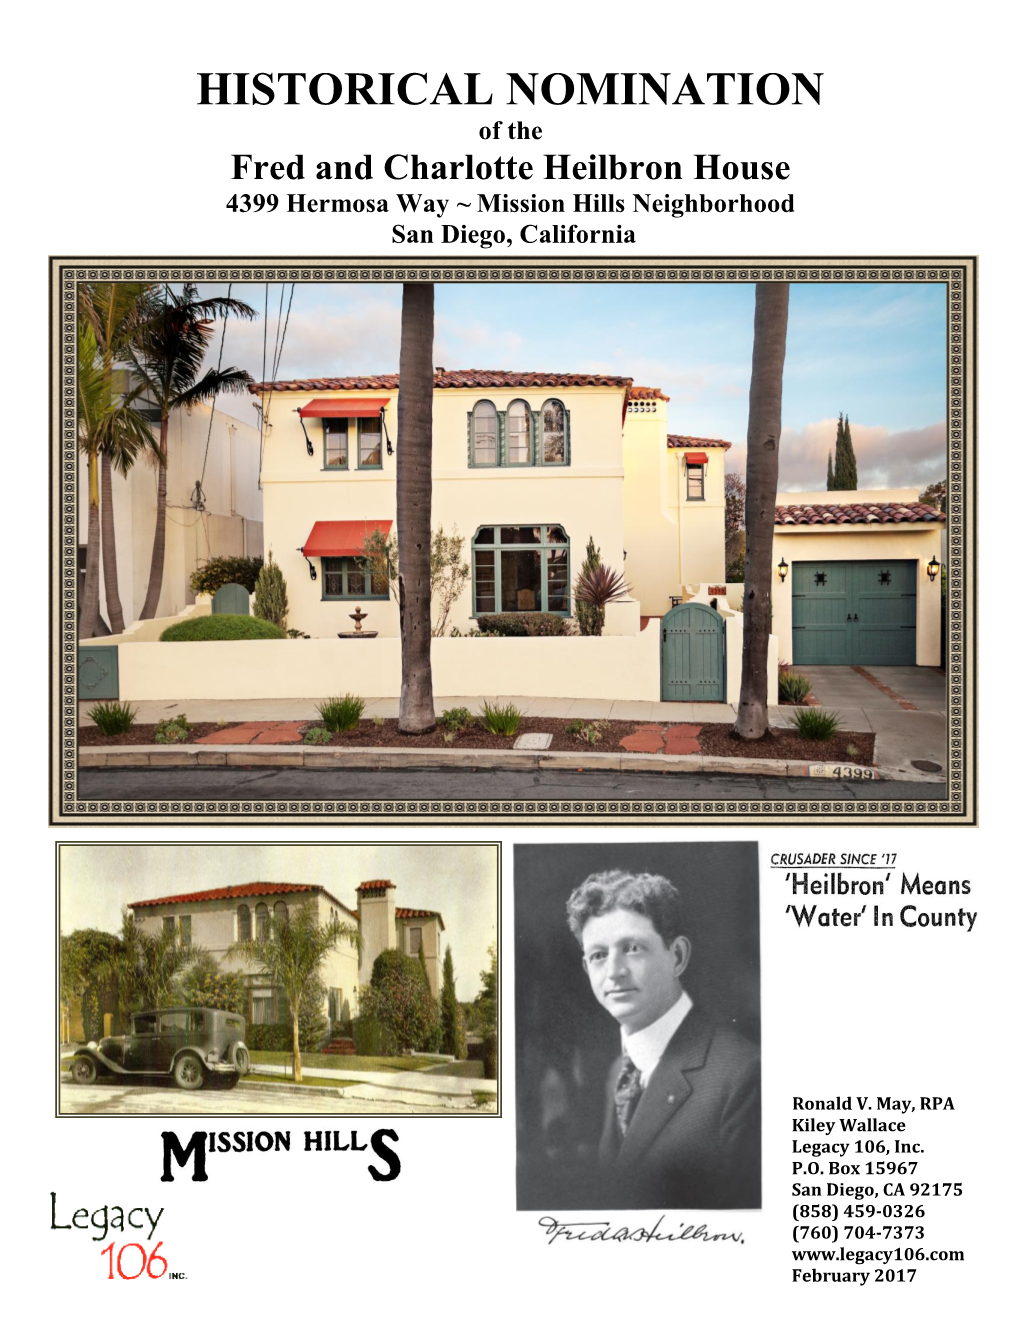 HISTORICAL NOMINATION of the Fred and Charlotte Heilbron House 4399 Hermosa Way ~ Mission Hills Neighborhood San Diego, California